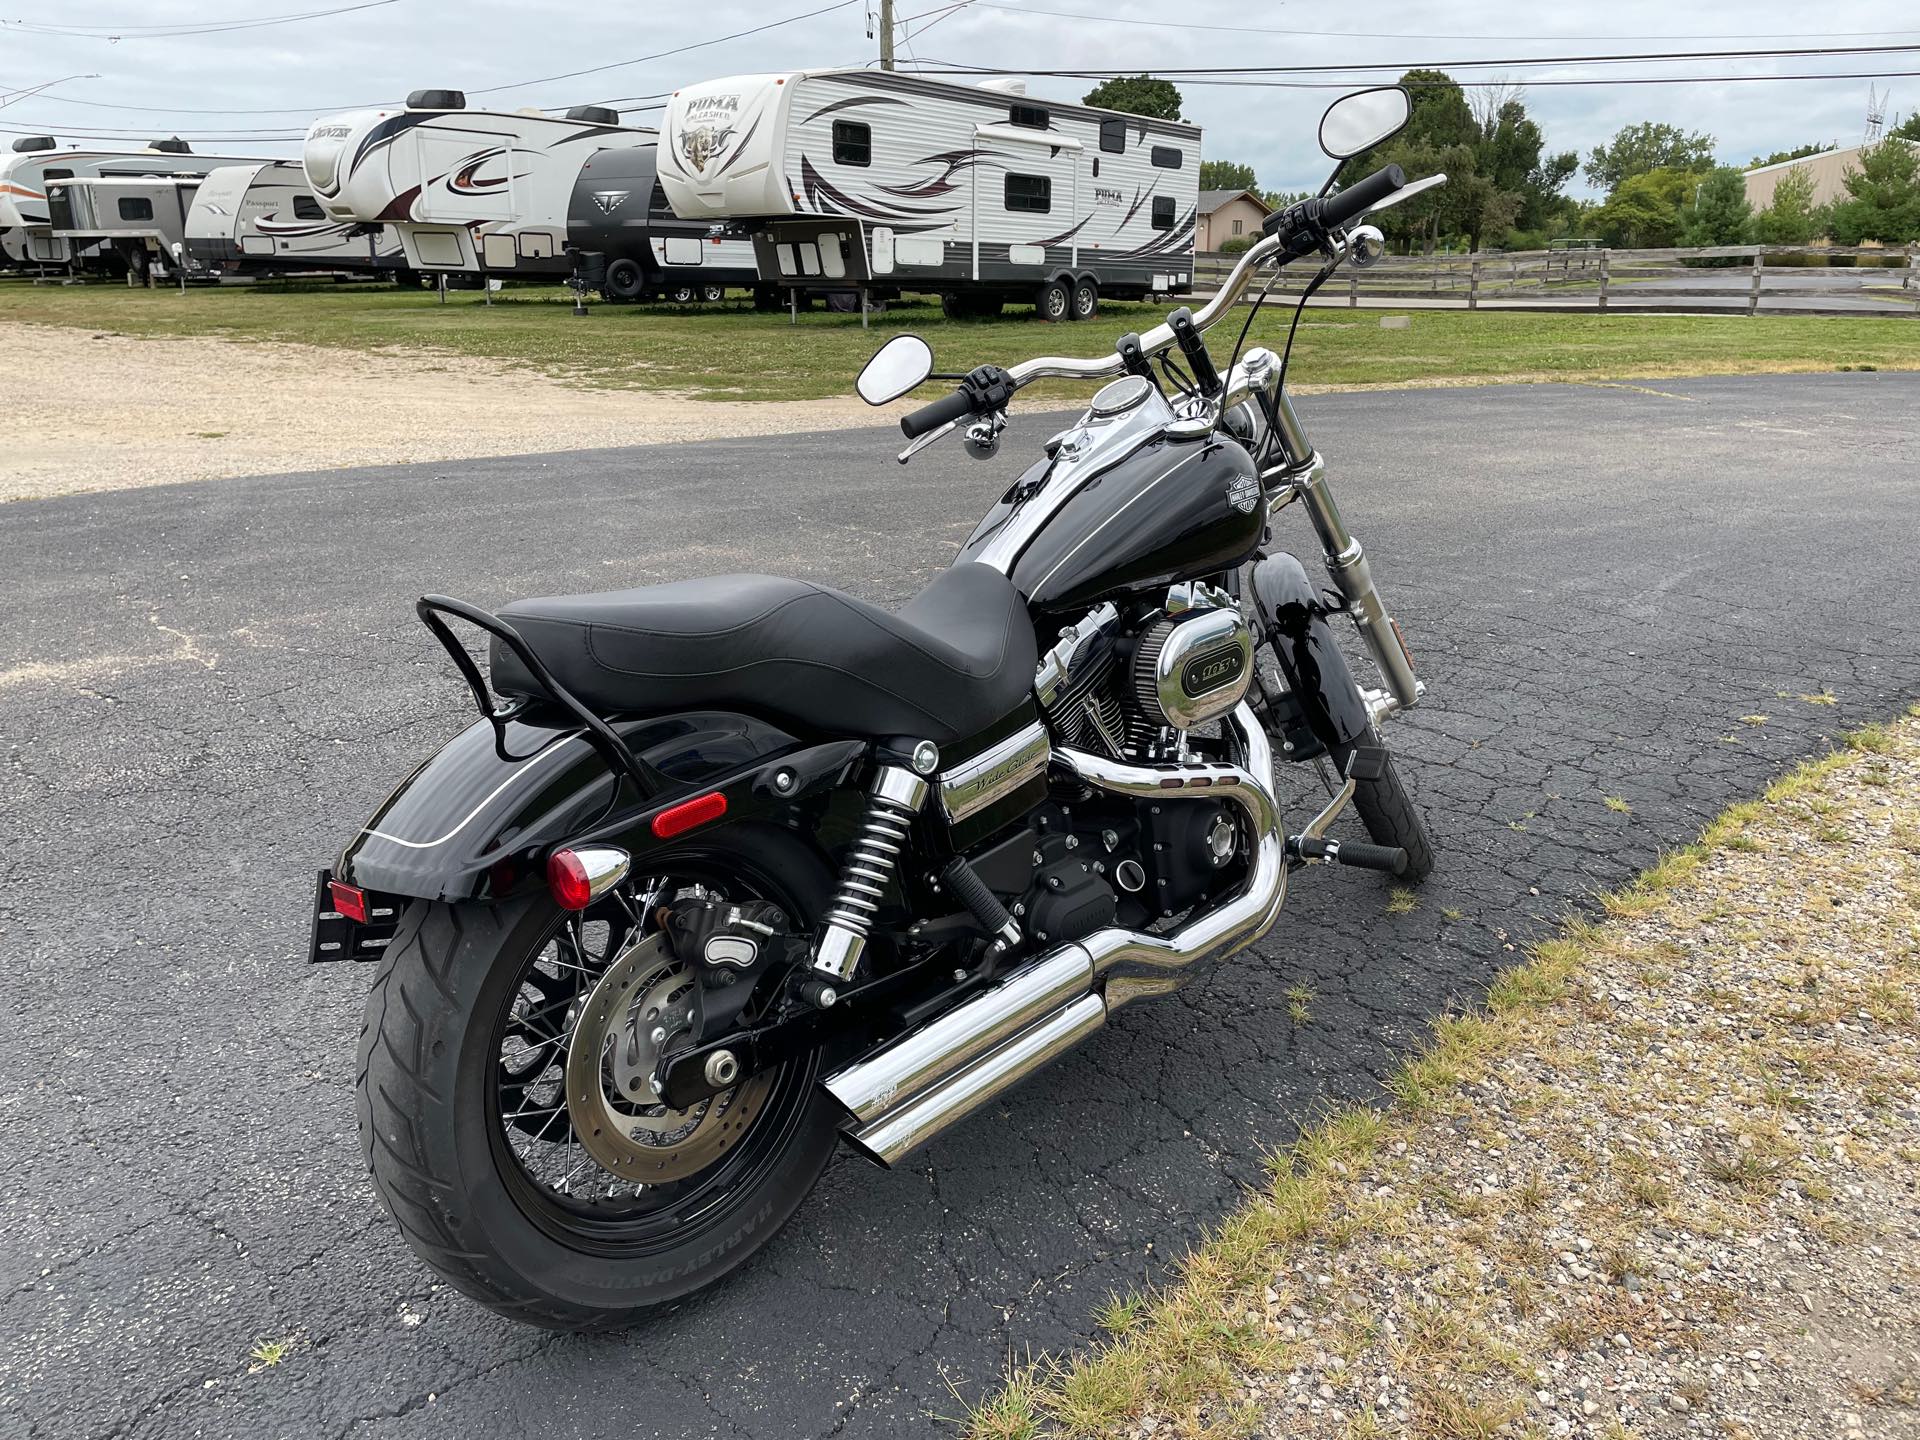 2016 Harley-Davidson Dyna Wide Glide at Randy's Cycle